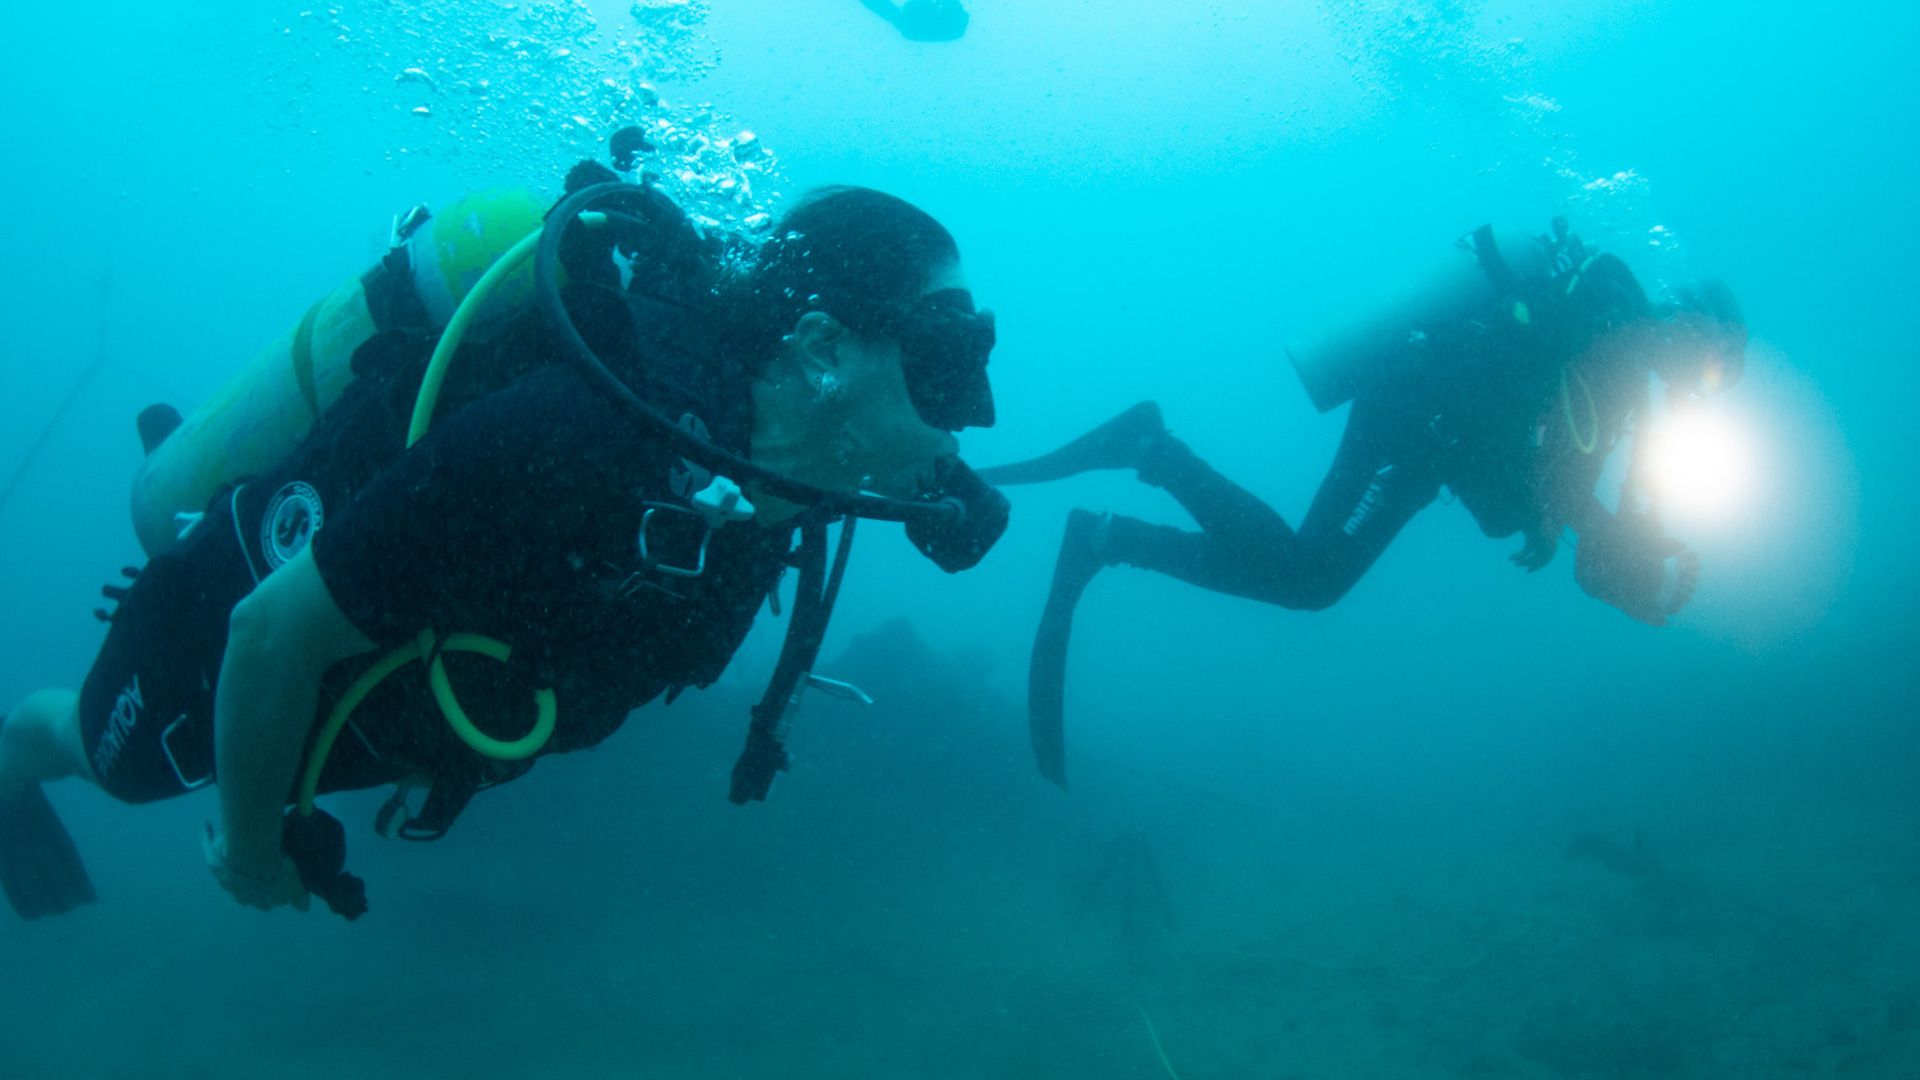 Scuba divers dive to the site of the Godawaya shipwreck